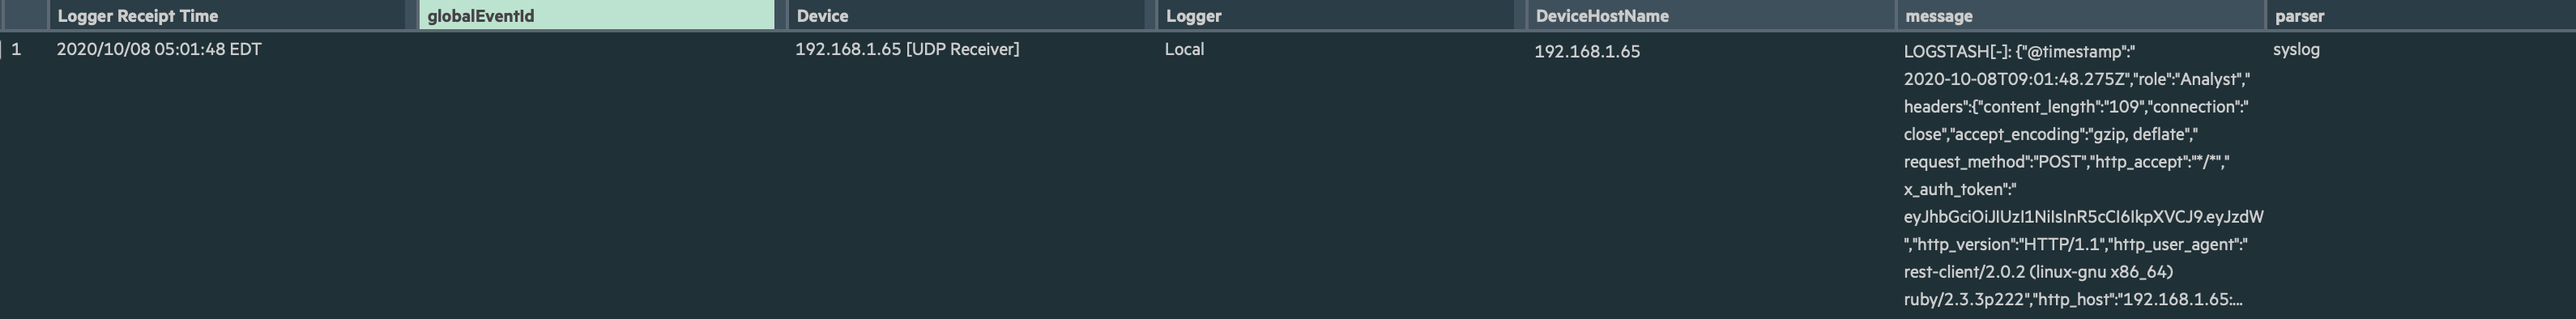 New user card in ArcSight Logger from Logstash